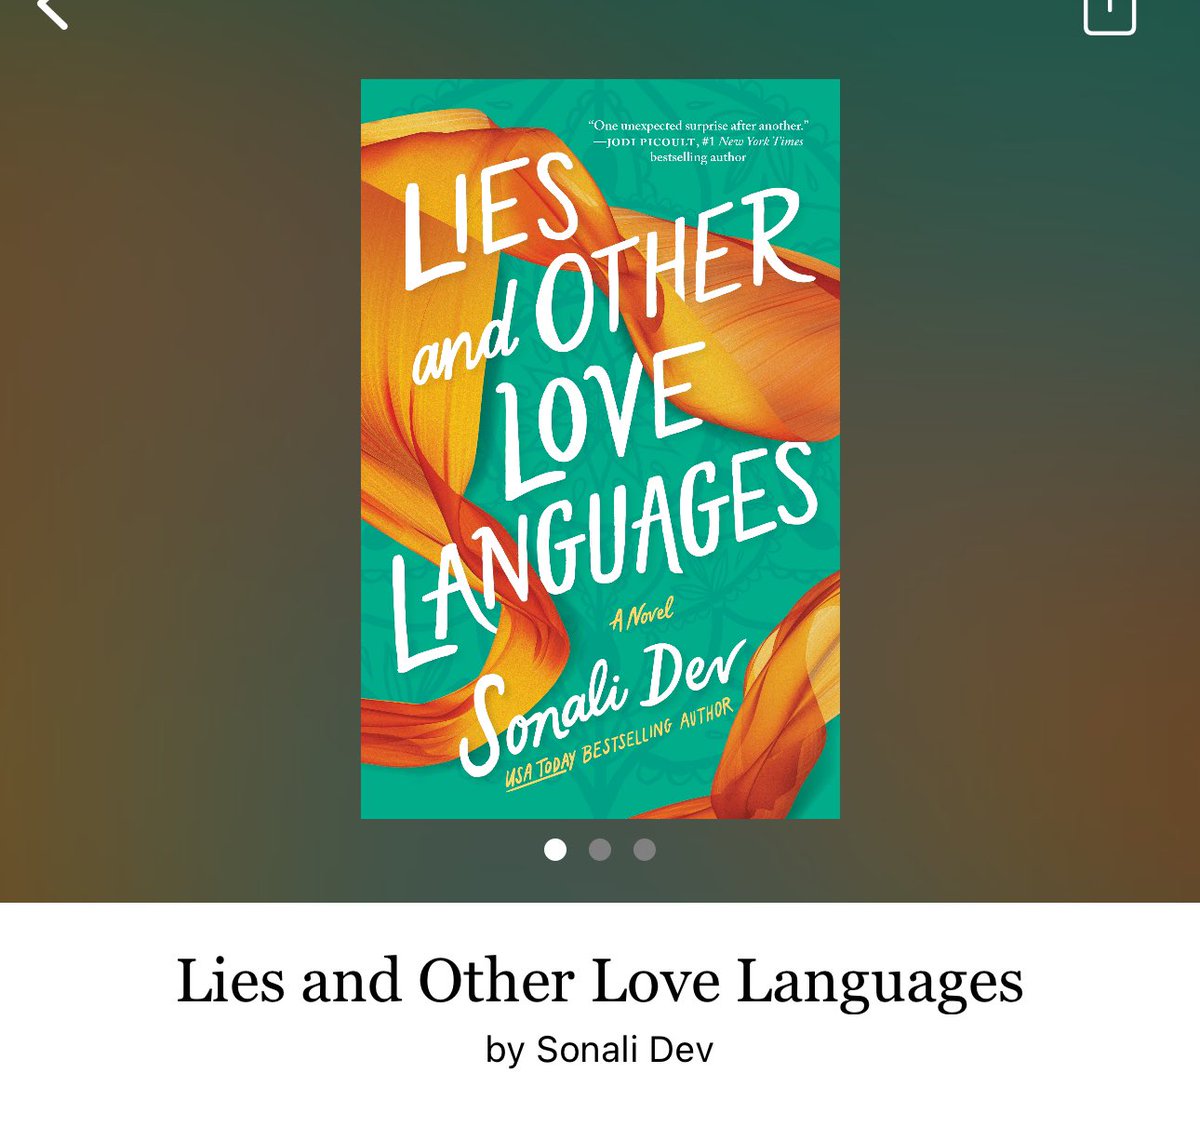 Lies And Other Love Languages by Sonali Dev

#LiesAndOtherLoveLanguages by #SonaliDev #6164 #36chapters #331pages #313of400 #Audiobook #Kindleunlimited #77for20 #VandyAndRani #11houraudiobook #march2024 #clearingoffreadingshelves #whatsnext #readitquick